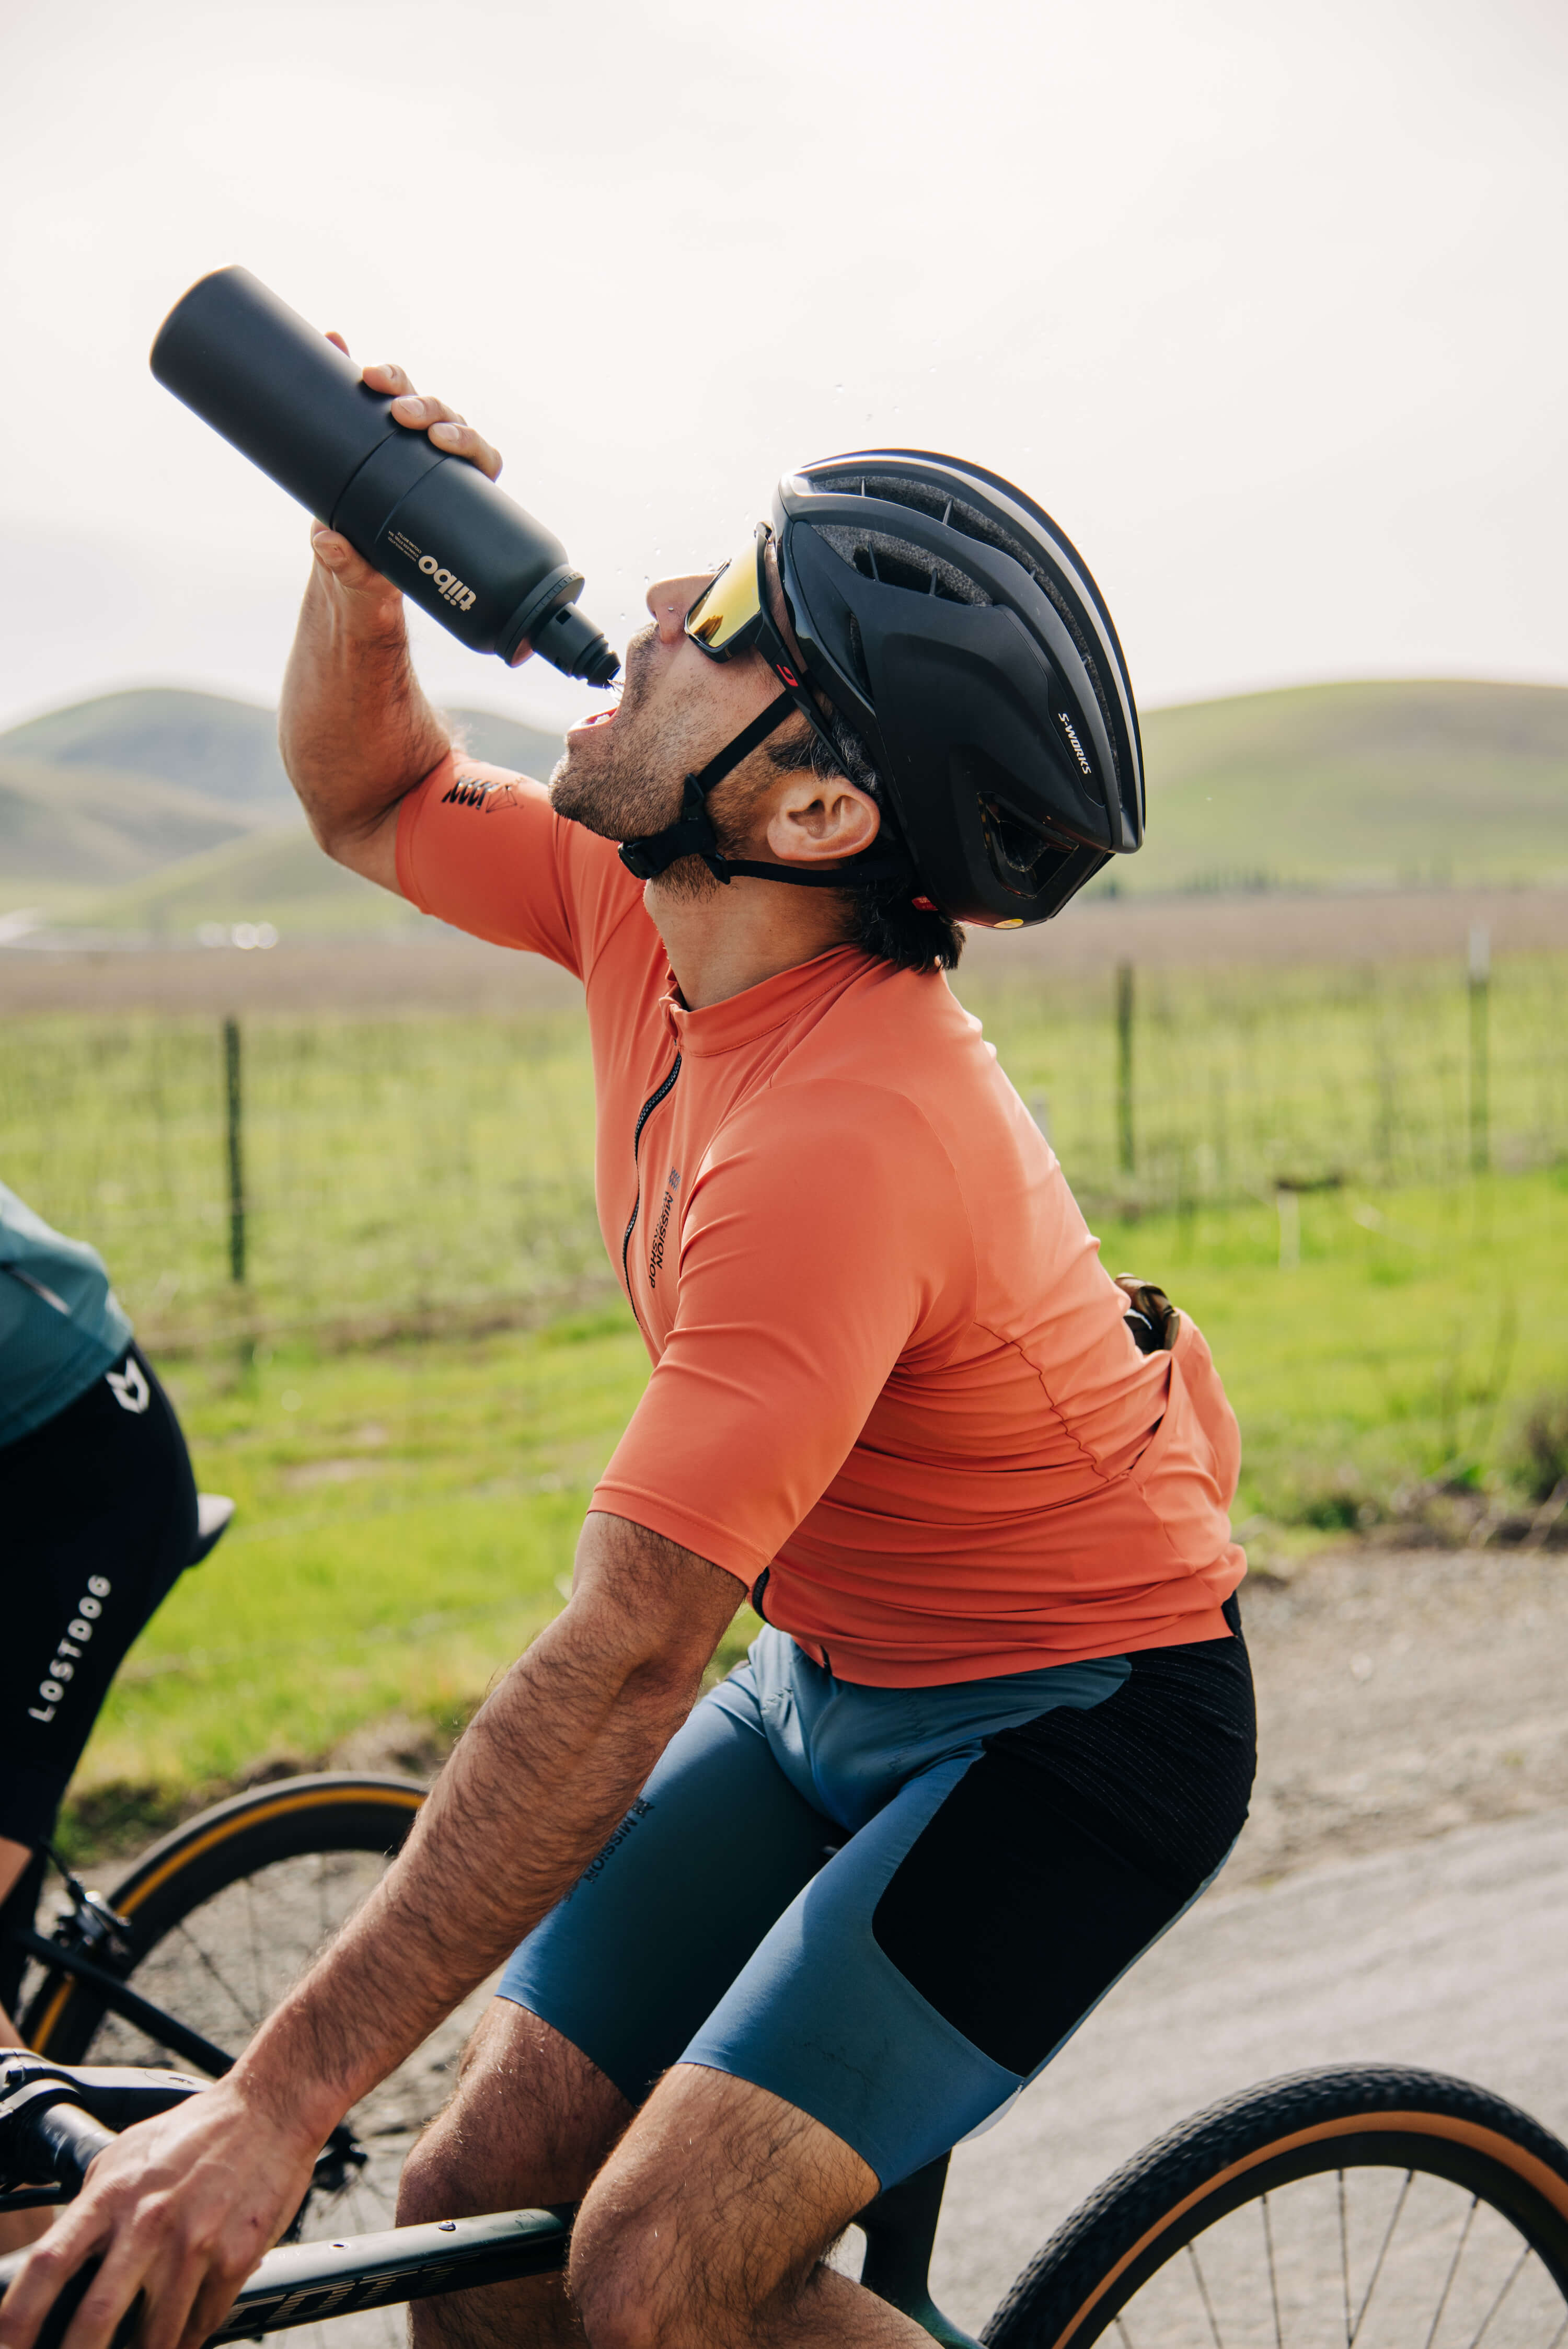 Hydration on Wheels: How to Stay Hydrated on a Long Summer Ride